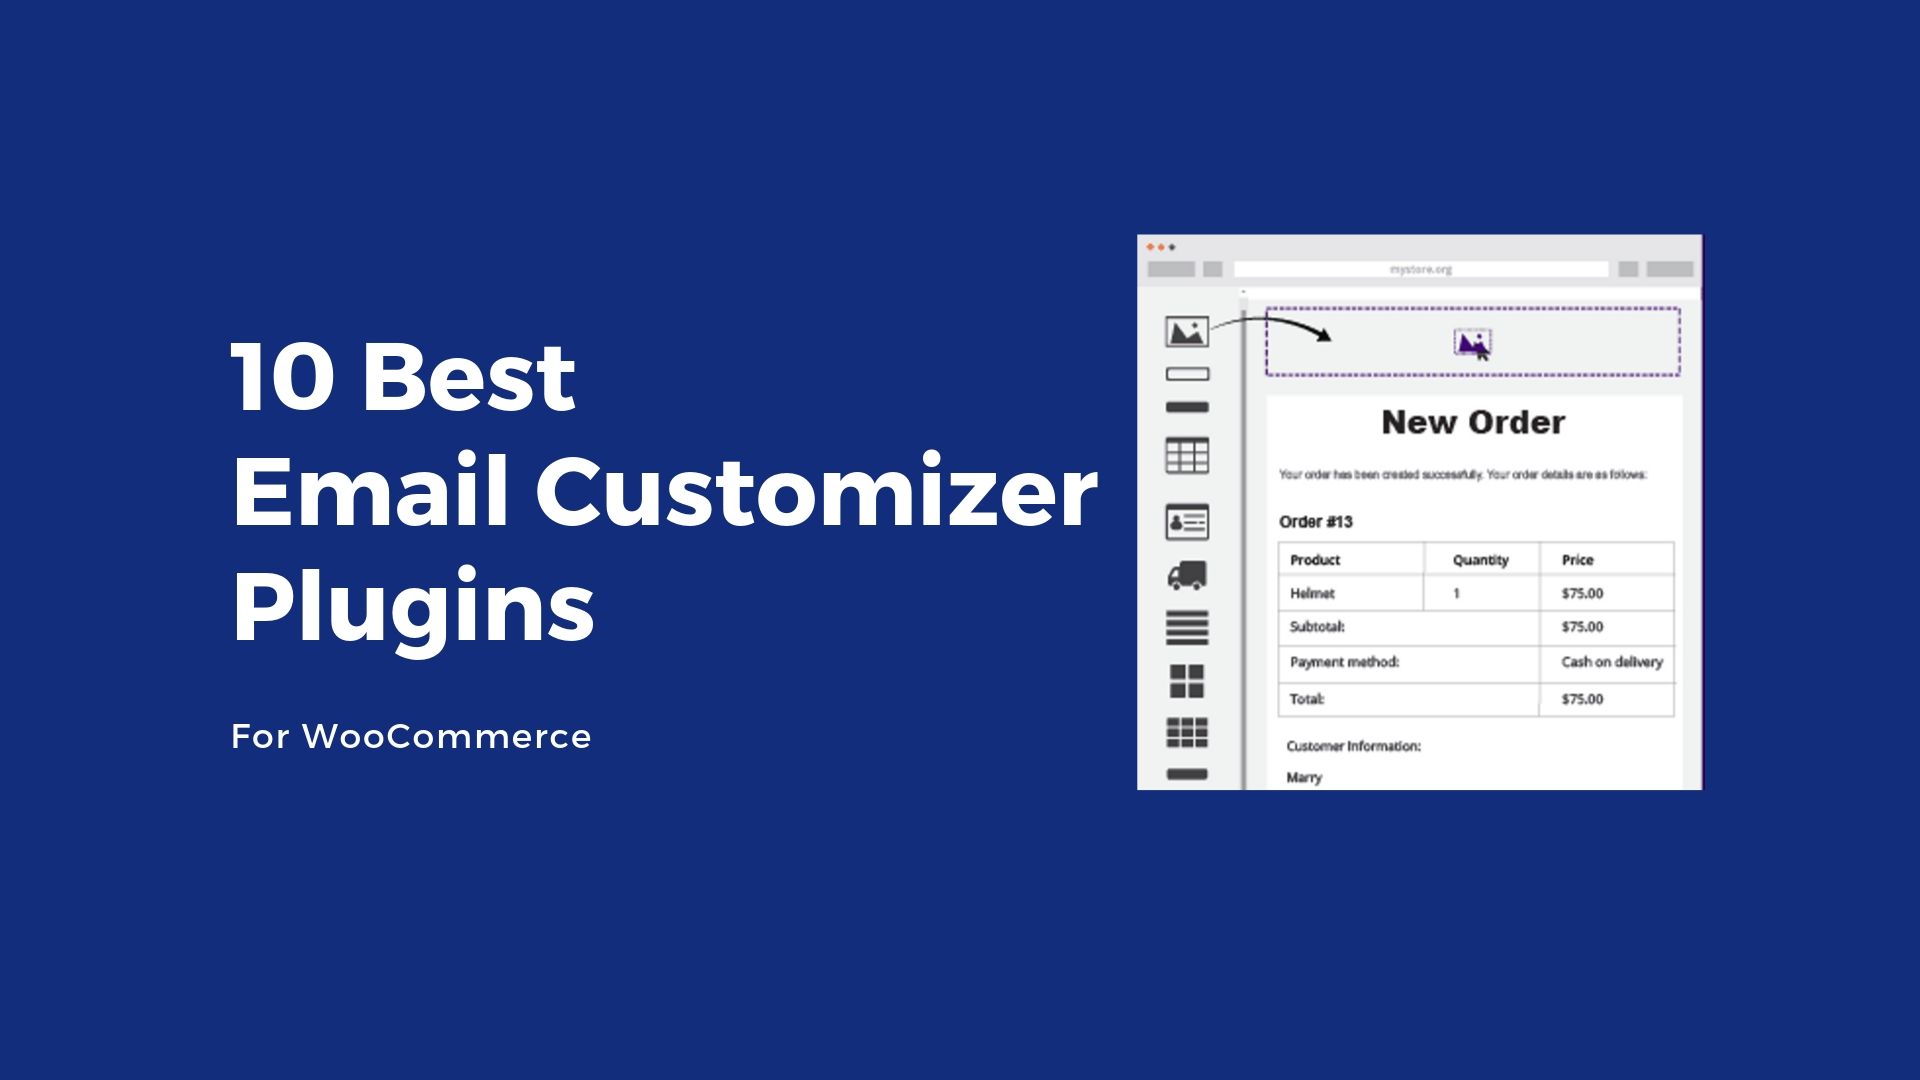 10 Best Email Customizer Plugins for WooCommerce